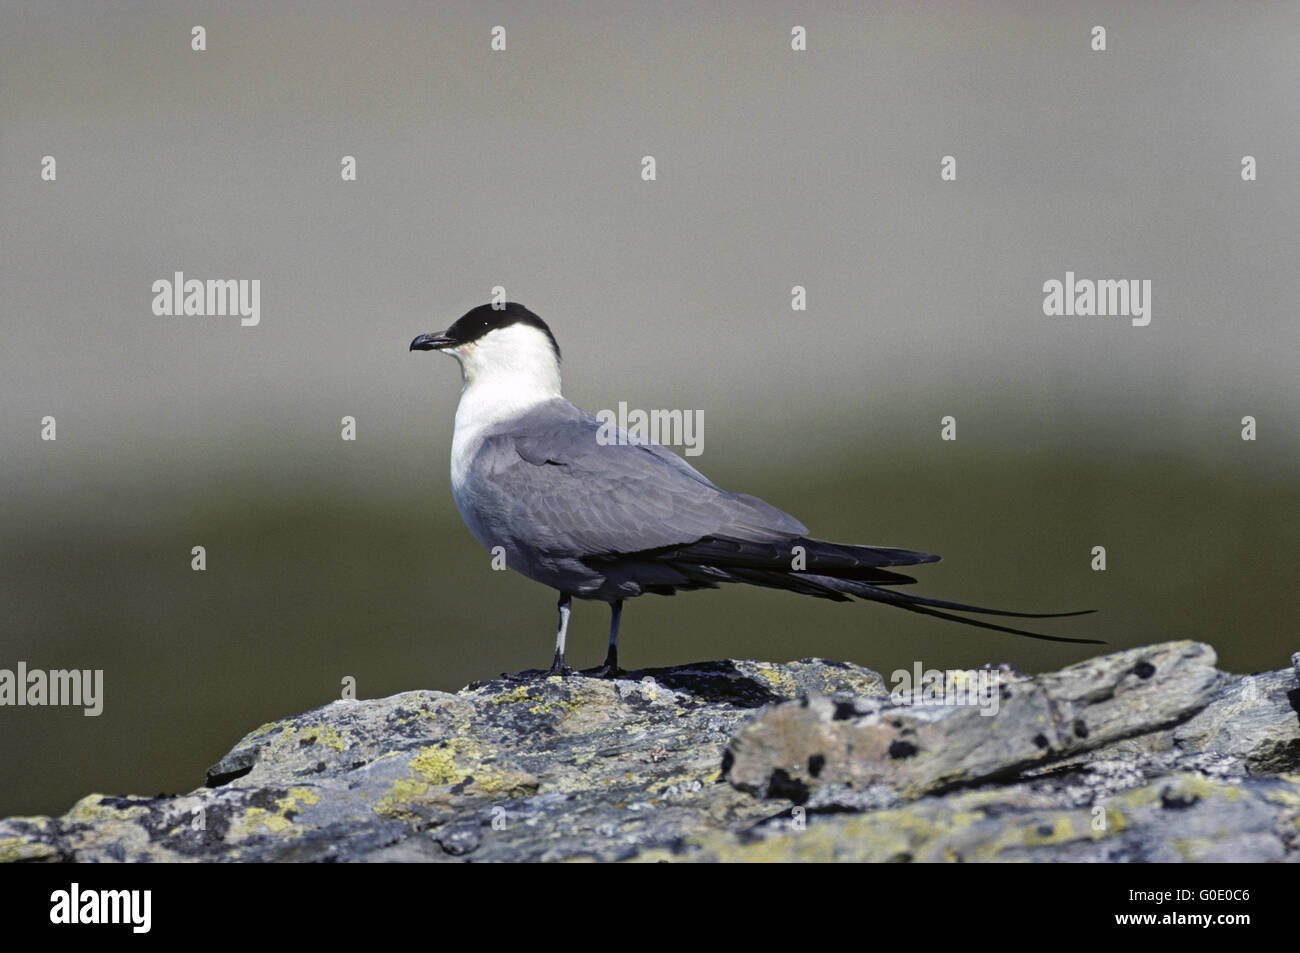 Long-tailed Jaeger adult bird in the tundra Stock Photo